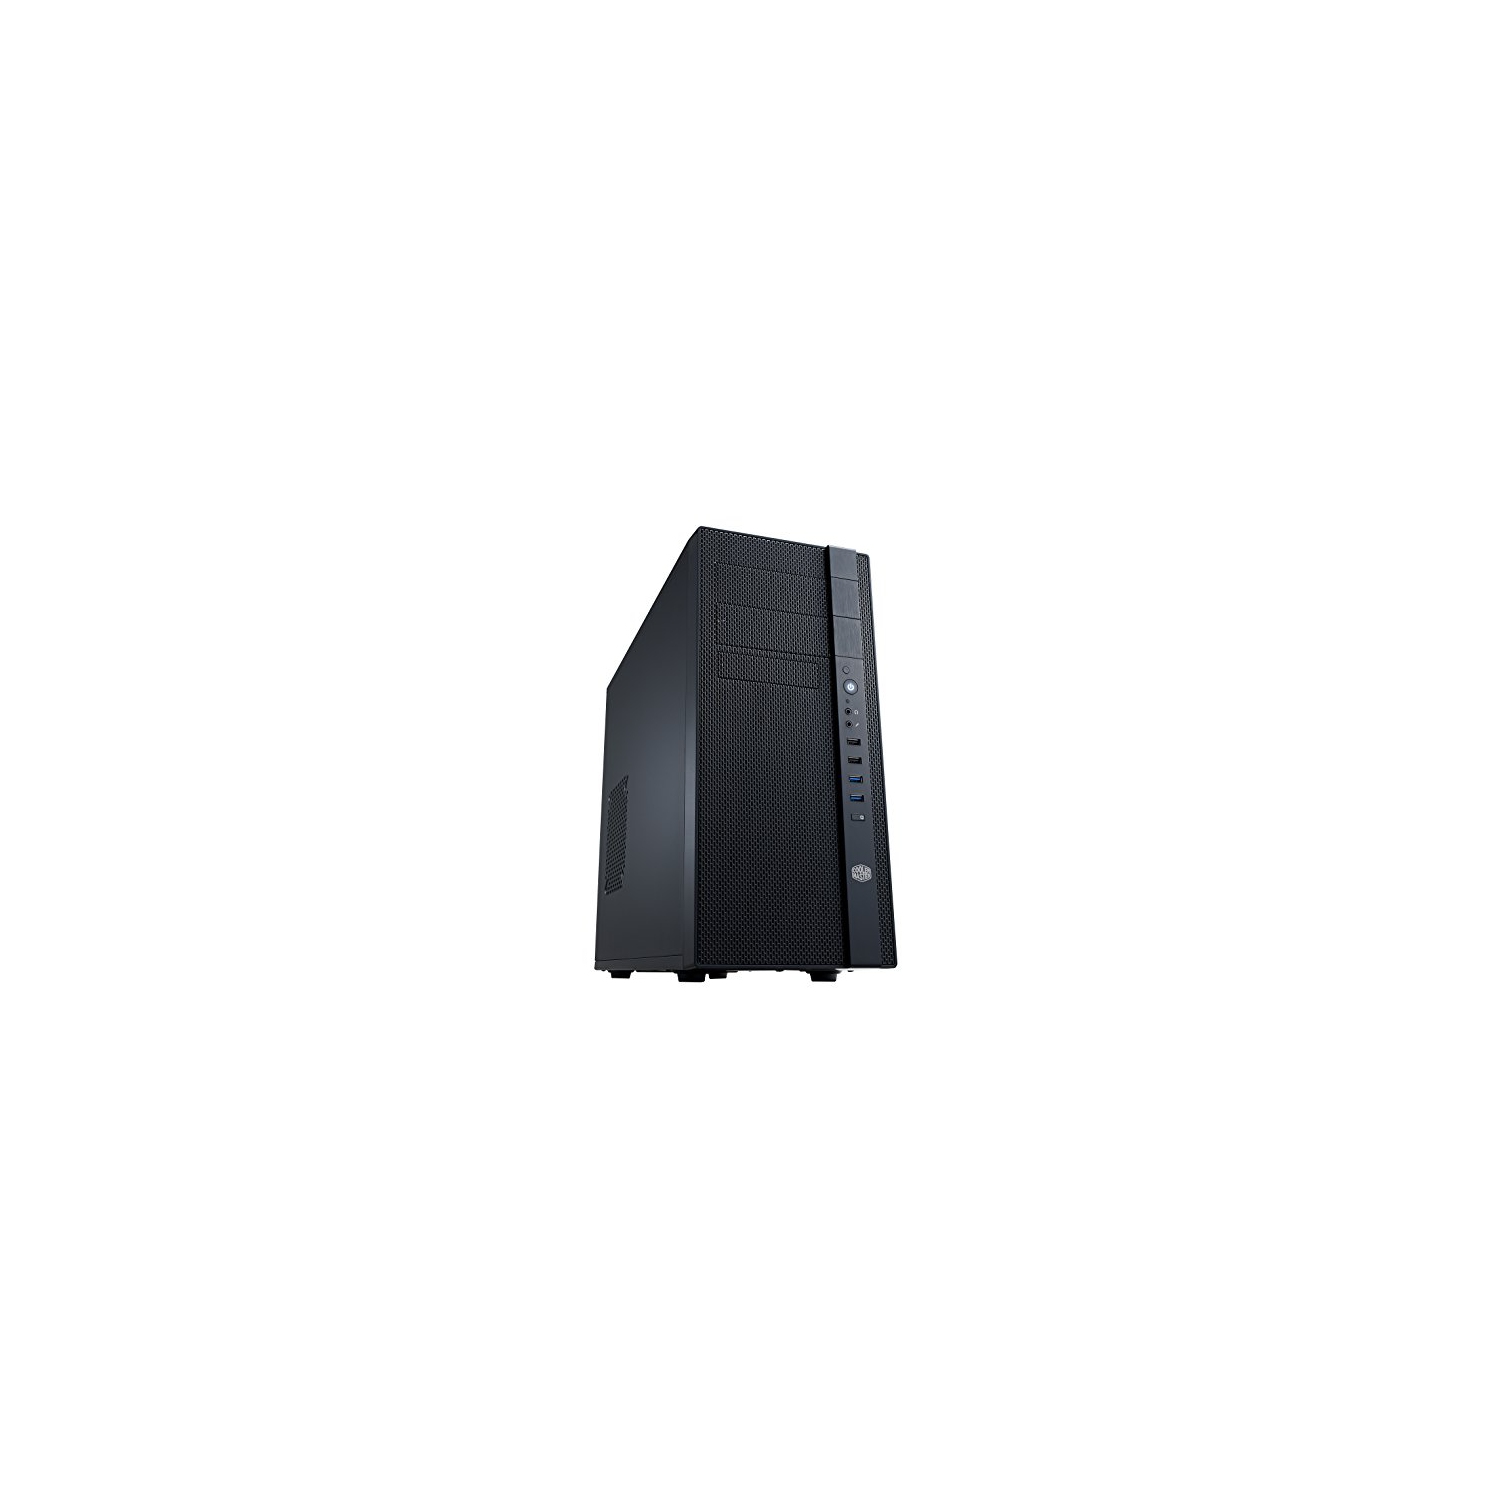 Cooler Master N400 - Mid Tower Computer Case with Fully Meshed Front Panel (NSE-400-KKN2)